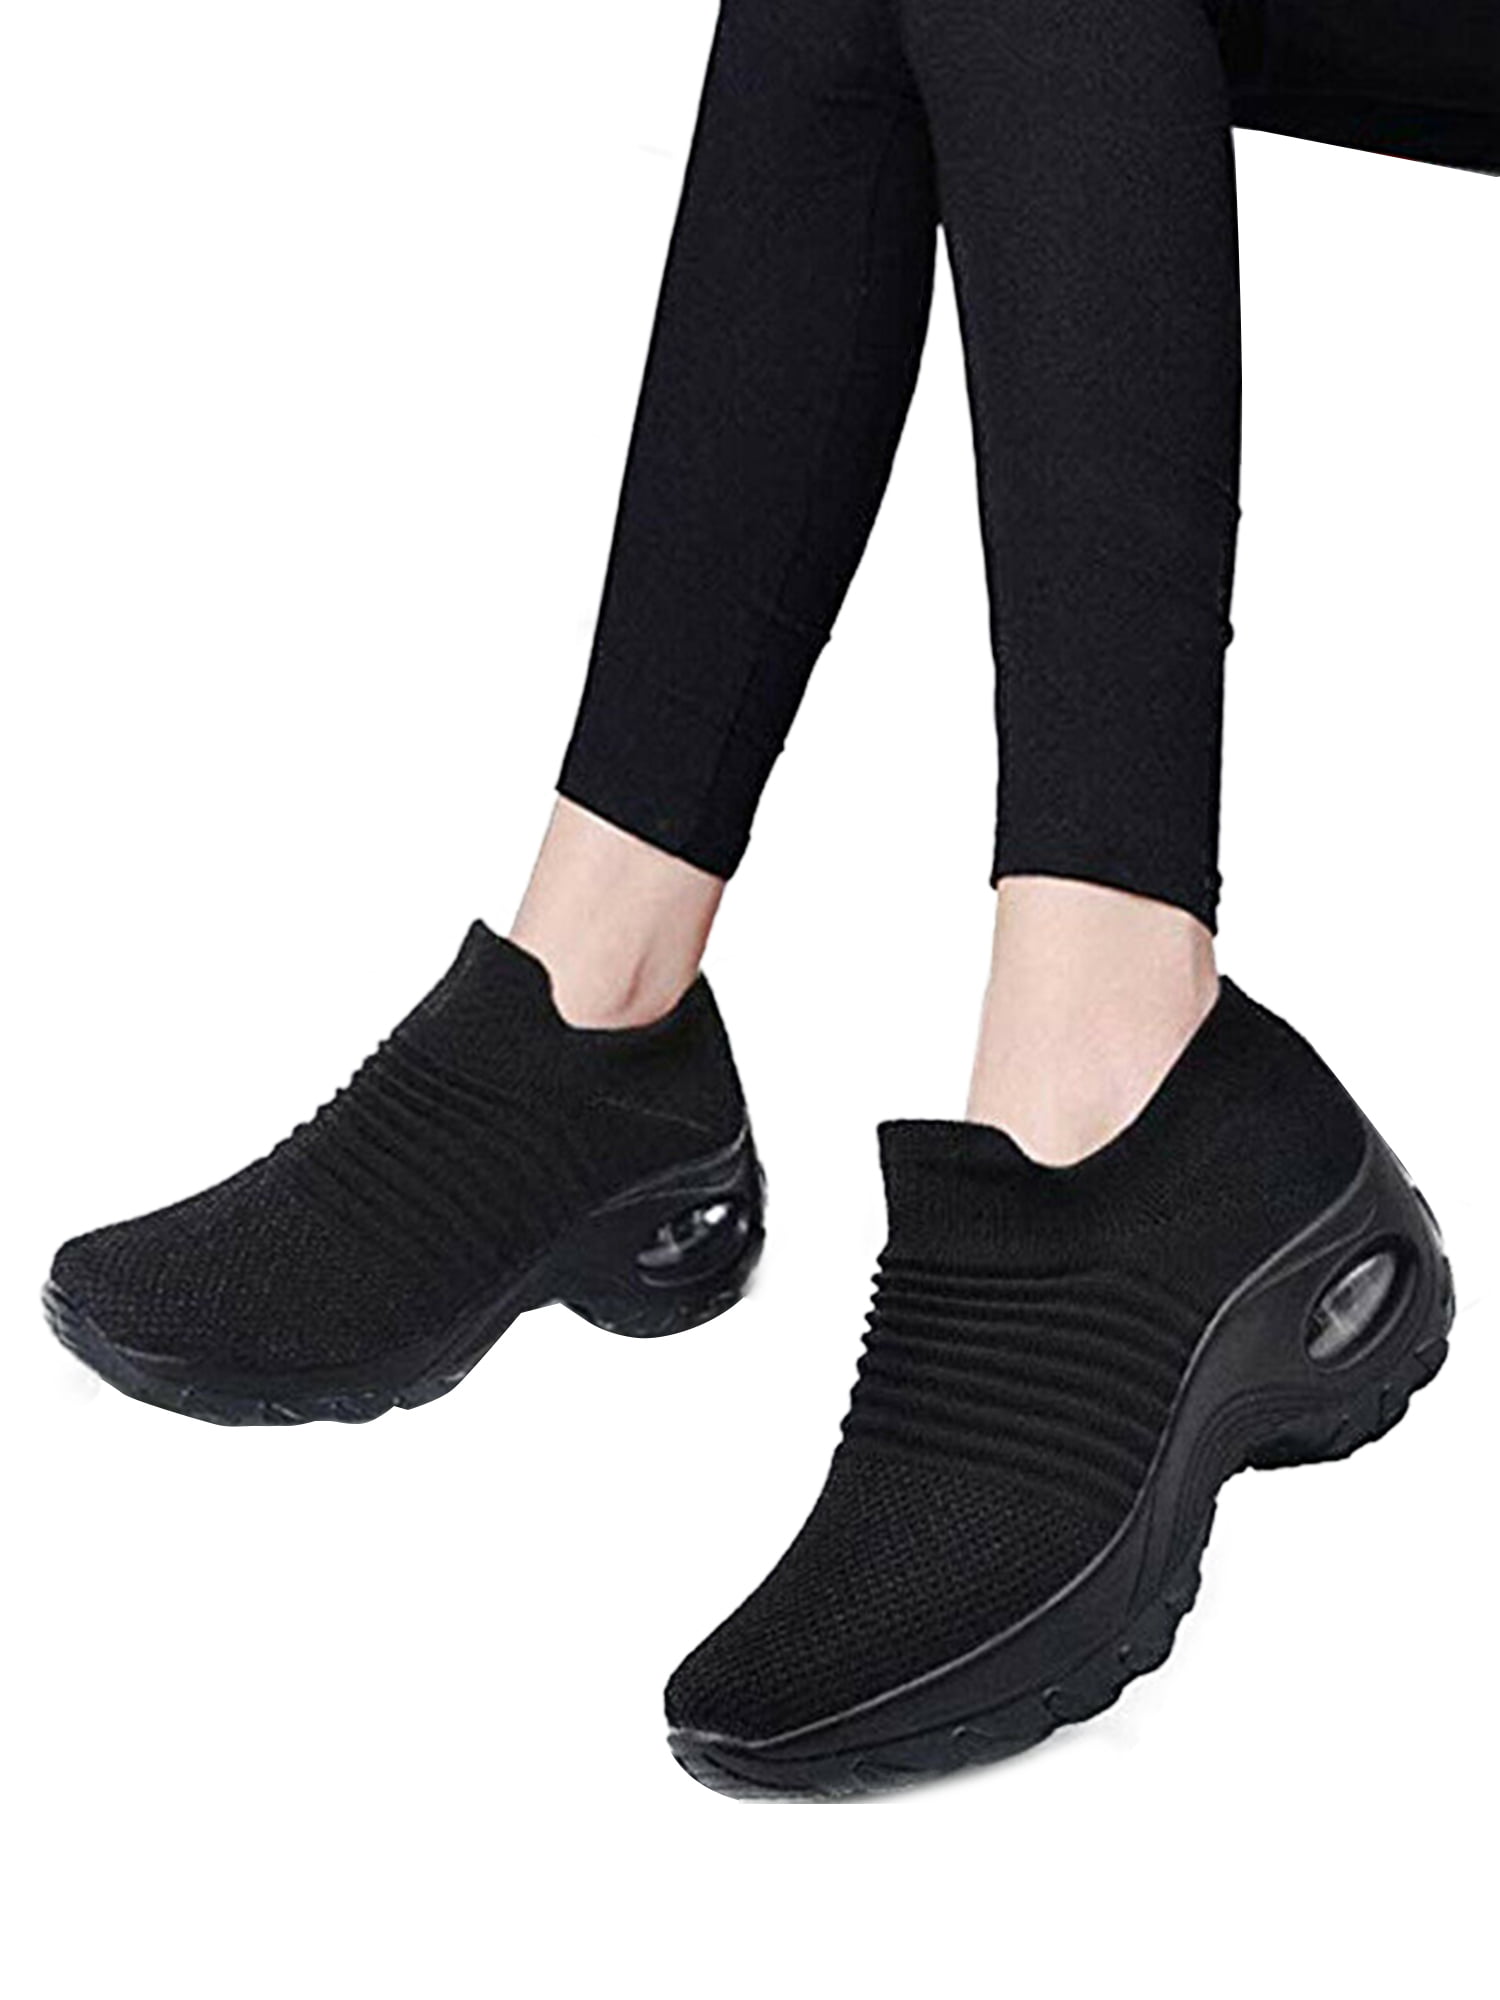 Women Ladies Trainers Cushion Breathable Slip On Gym Running Sneaker Sport Shoes 